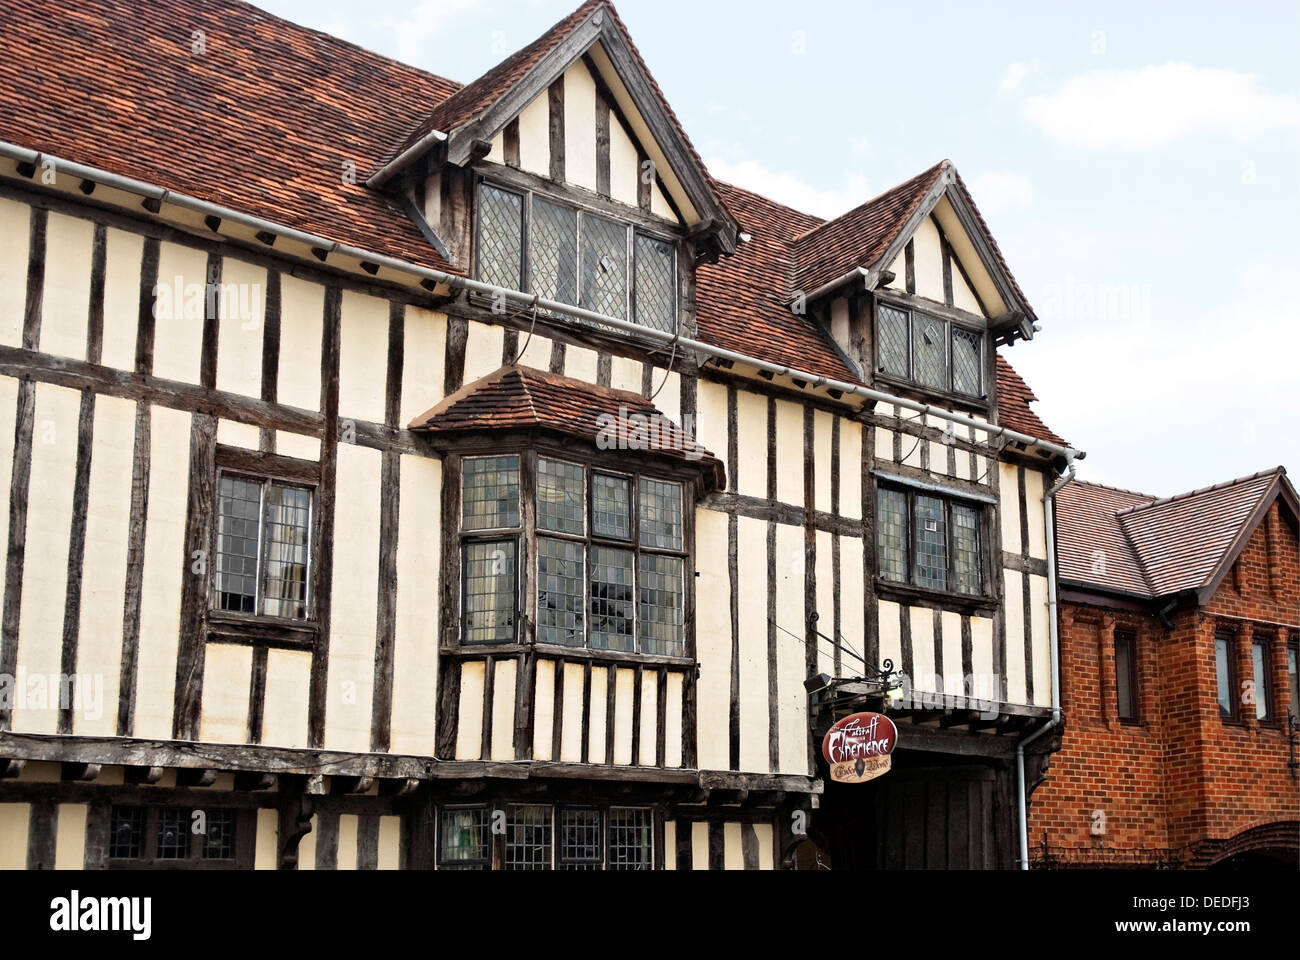 The Falstaffs Experience in Stratford upon Avon, a award-winning visitor attraction that brings the 16th century to life. Stock Photo